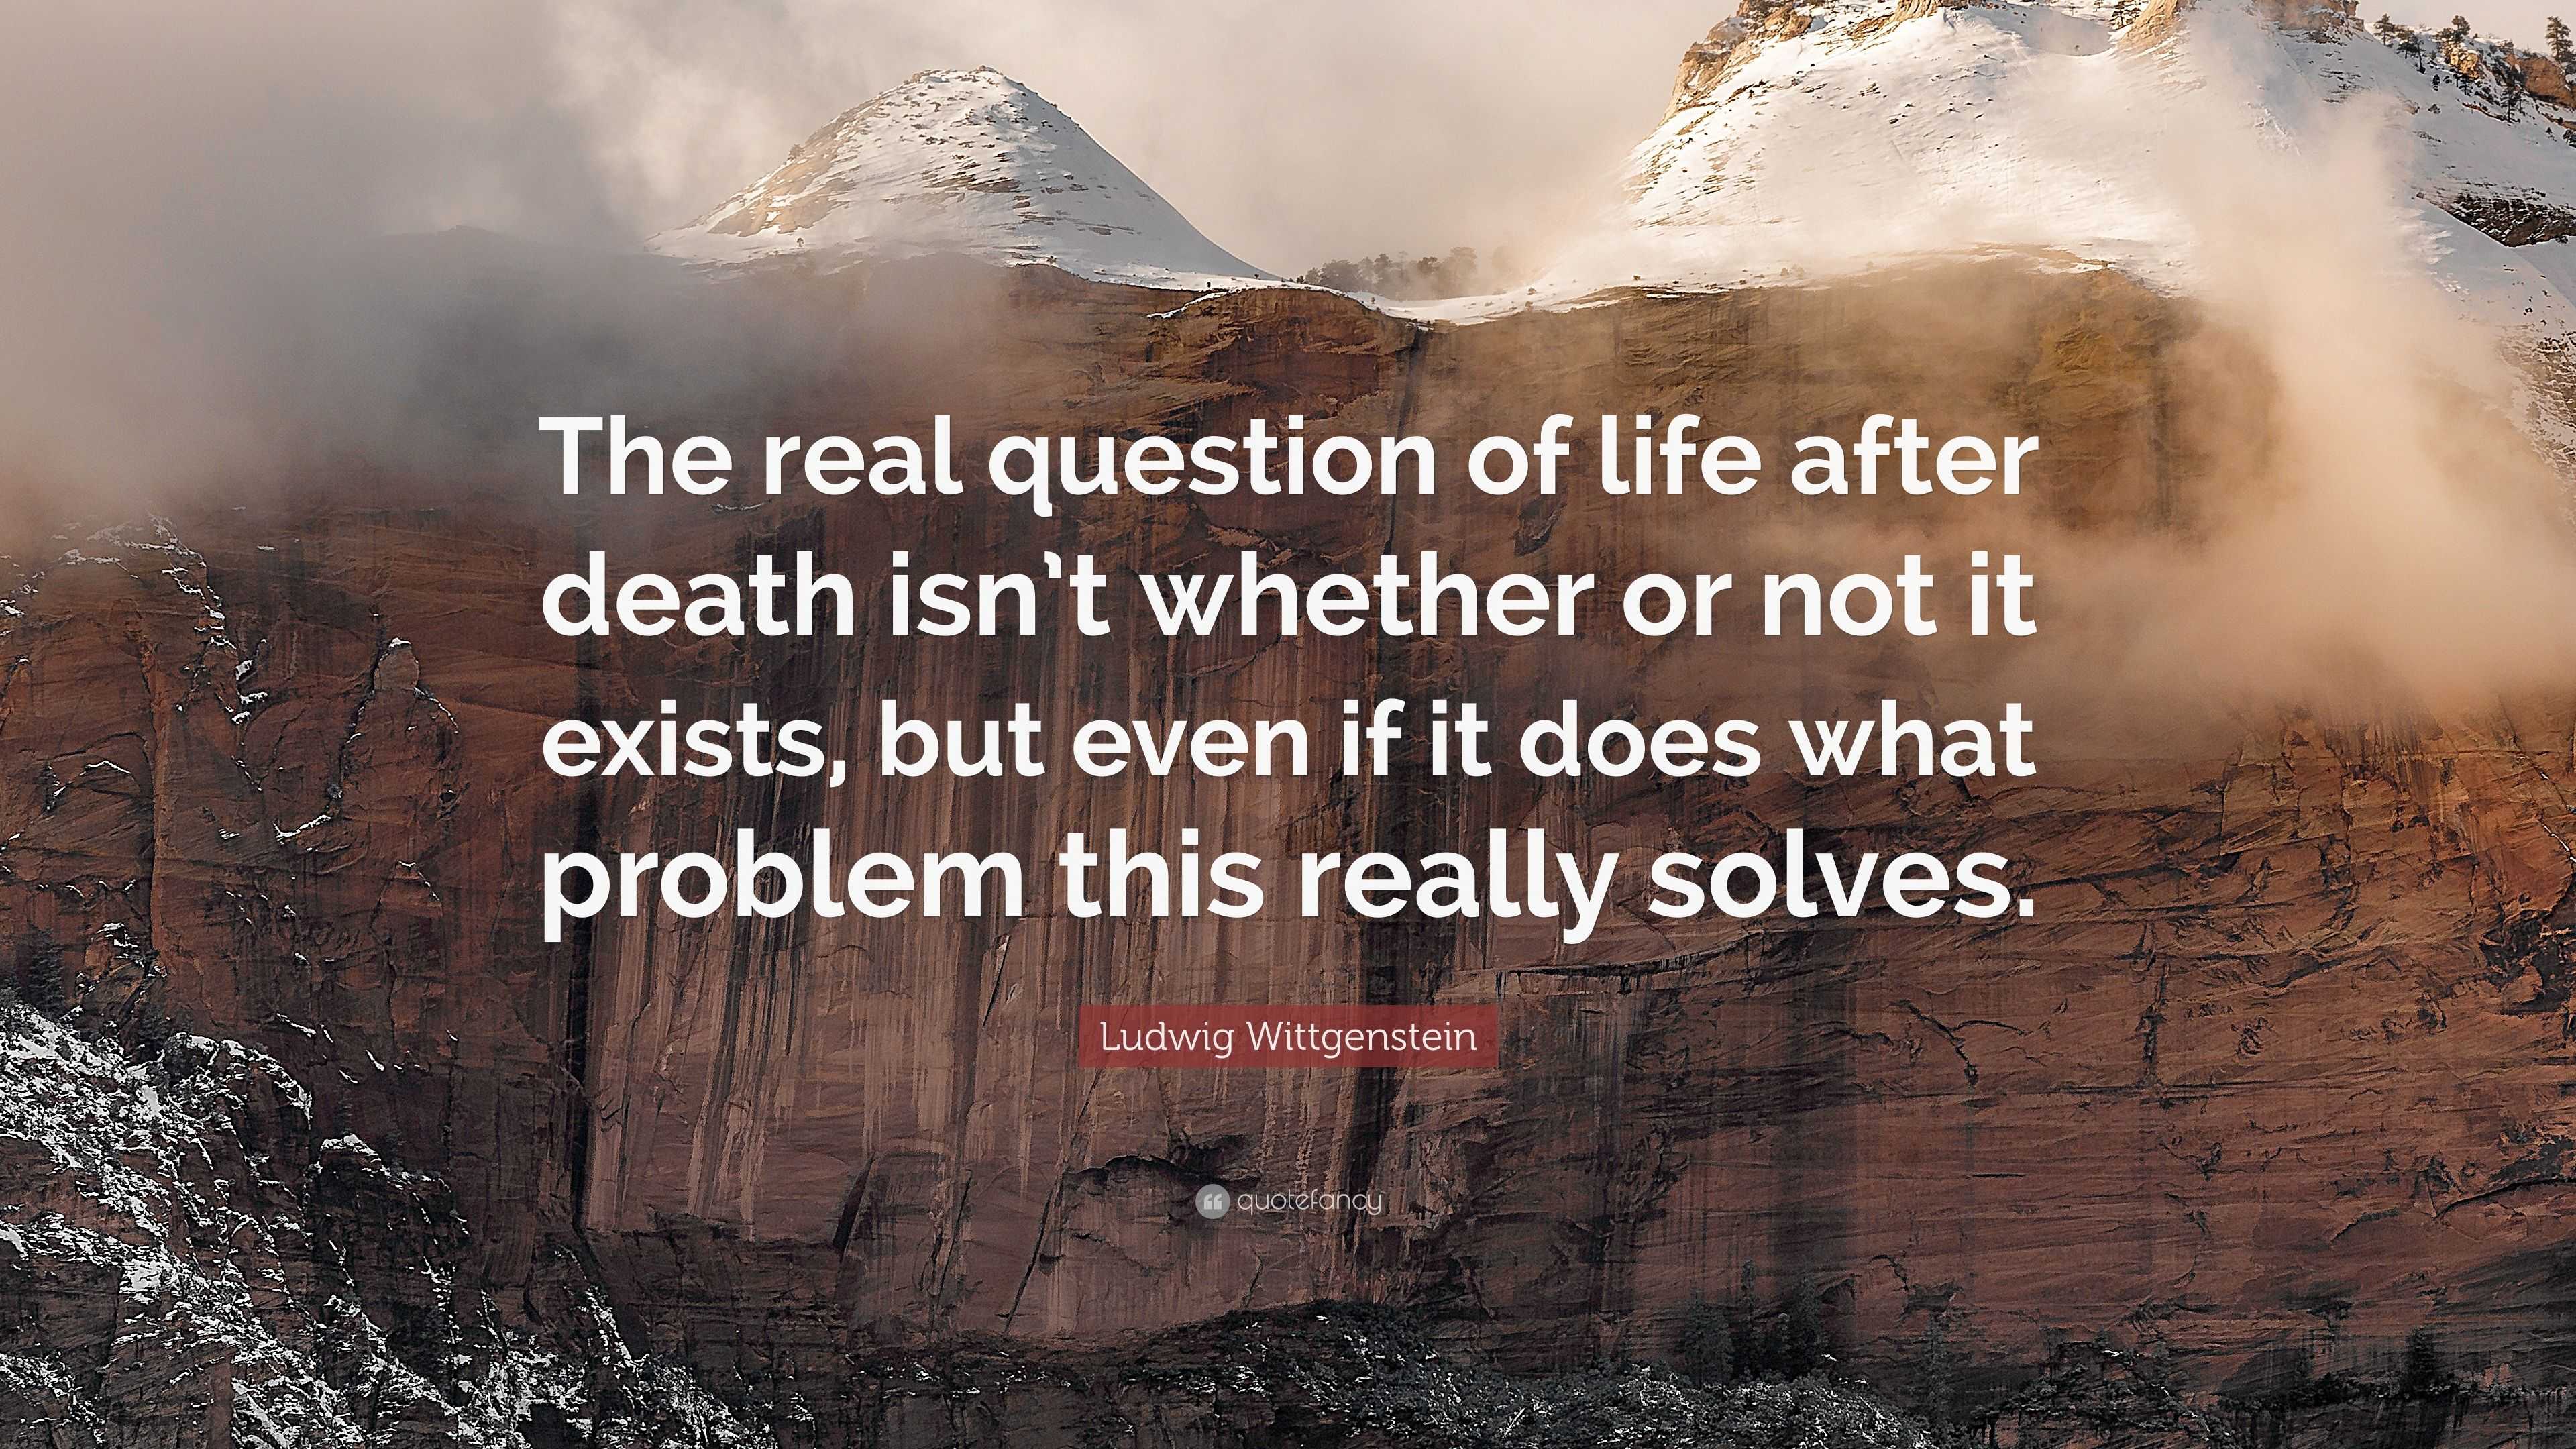 Ludwig Wittgenstein Quote: “The real question of life after death isn’t ...